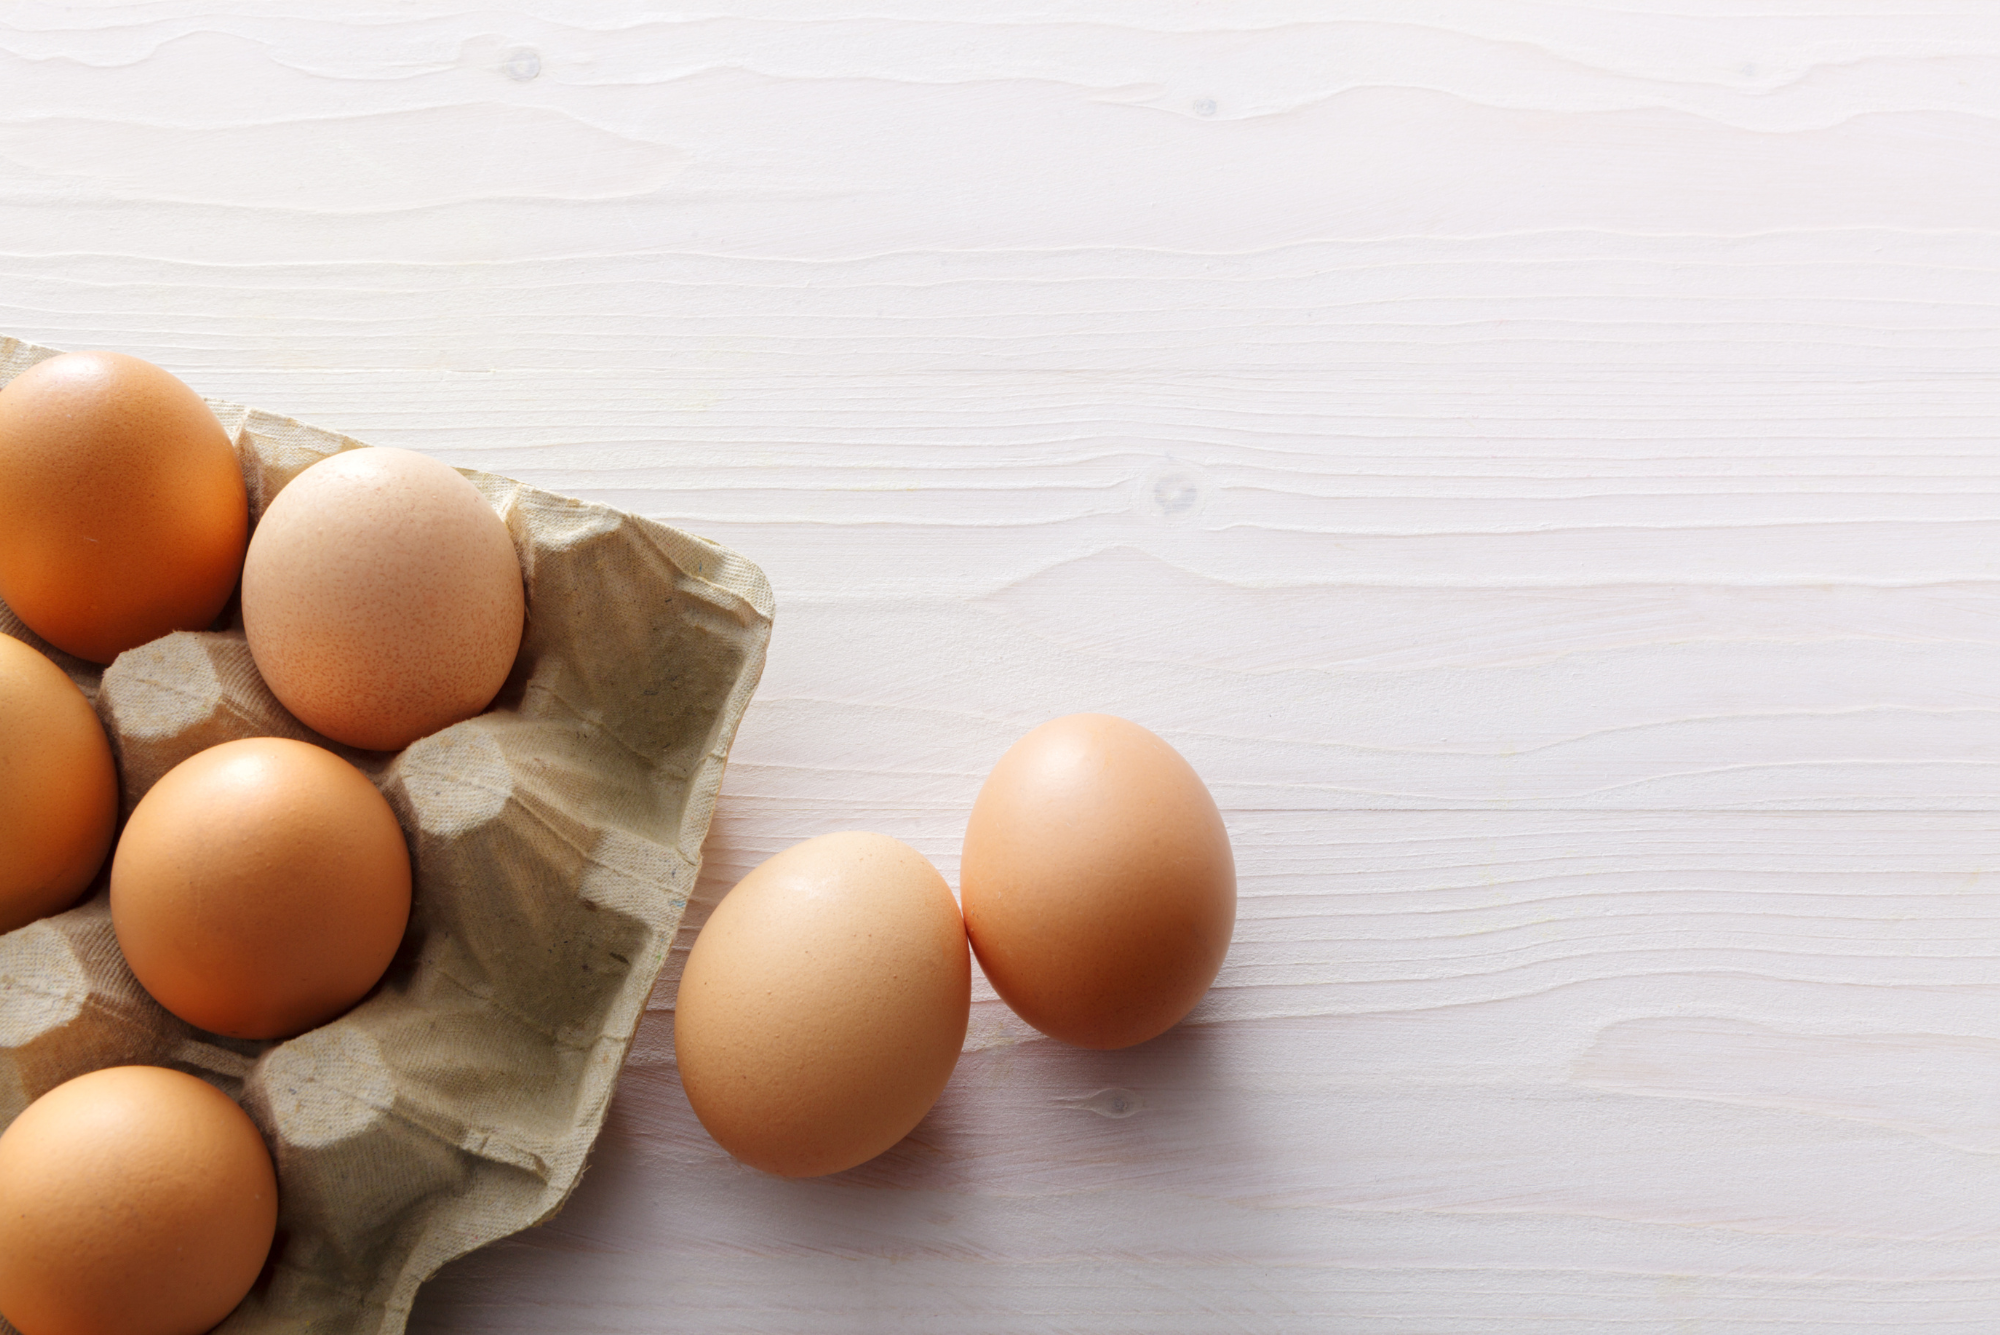 A carton of fresh brown eggs sits on a wooden table top, representing the nutritional value of eggs.